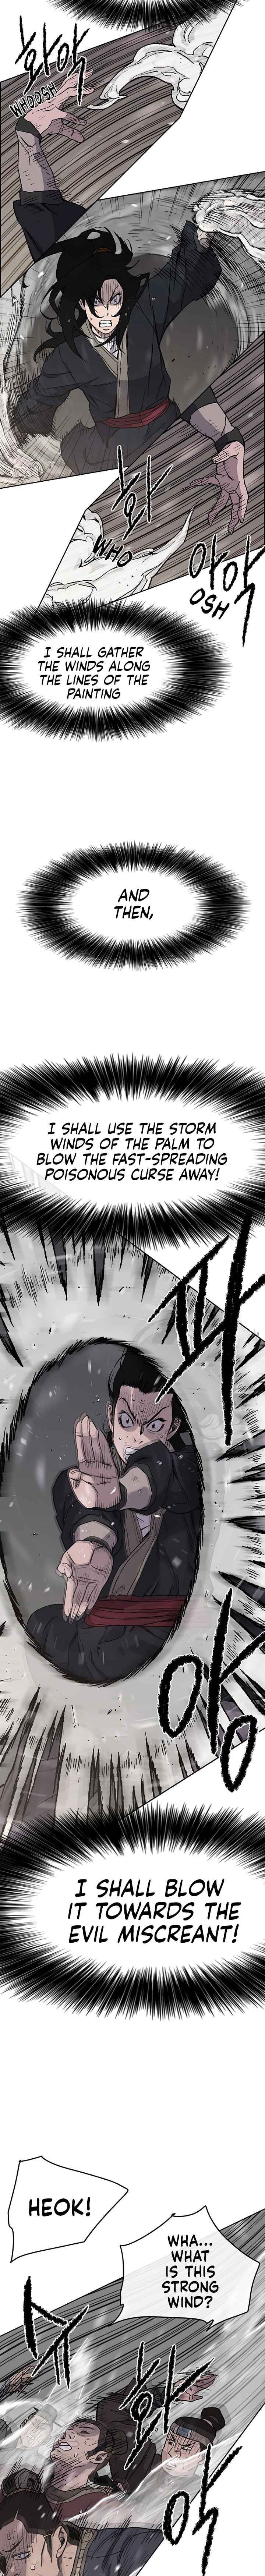 The Undefeatable Swordsman Chapter 021 page 6